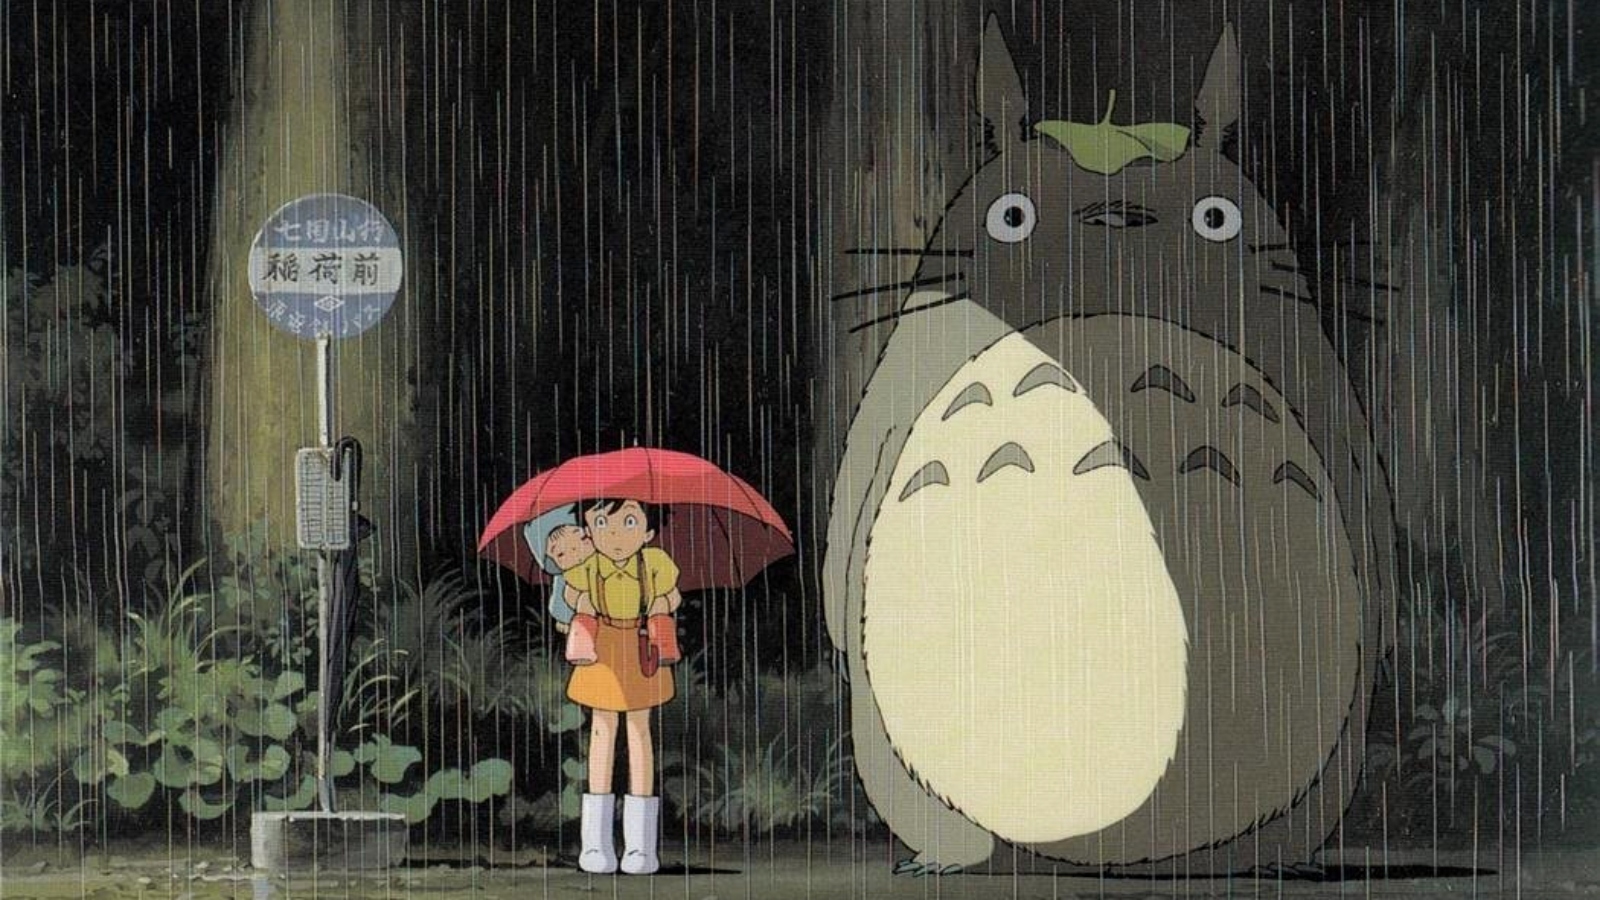 Satsuki, Mei and Totoro at the bus stop in My Neighbor Totoro